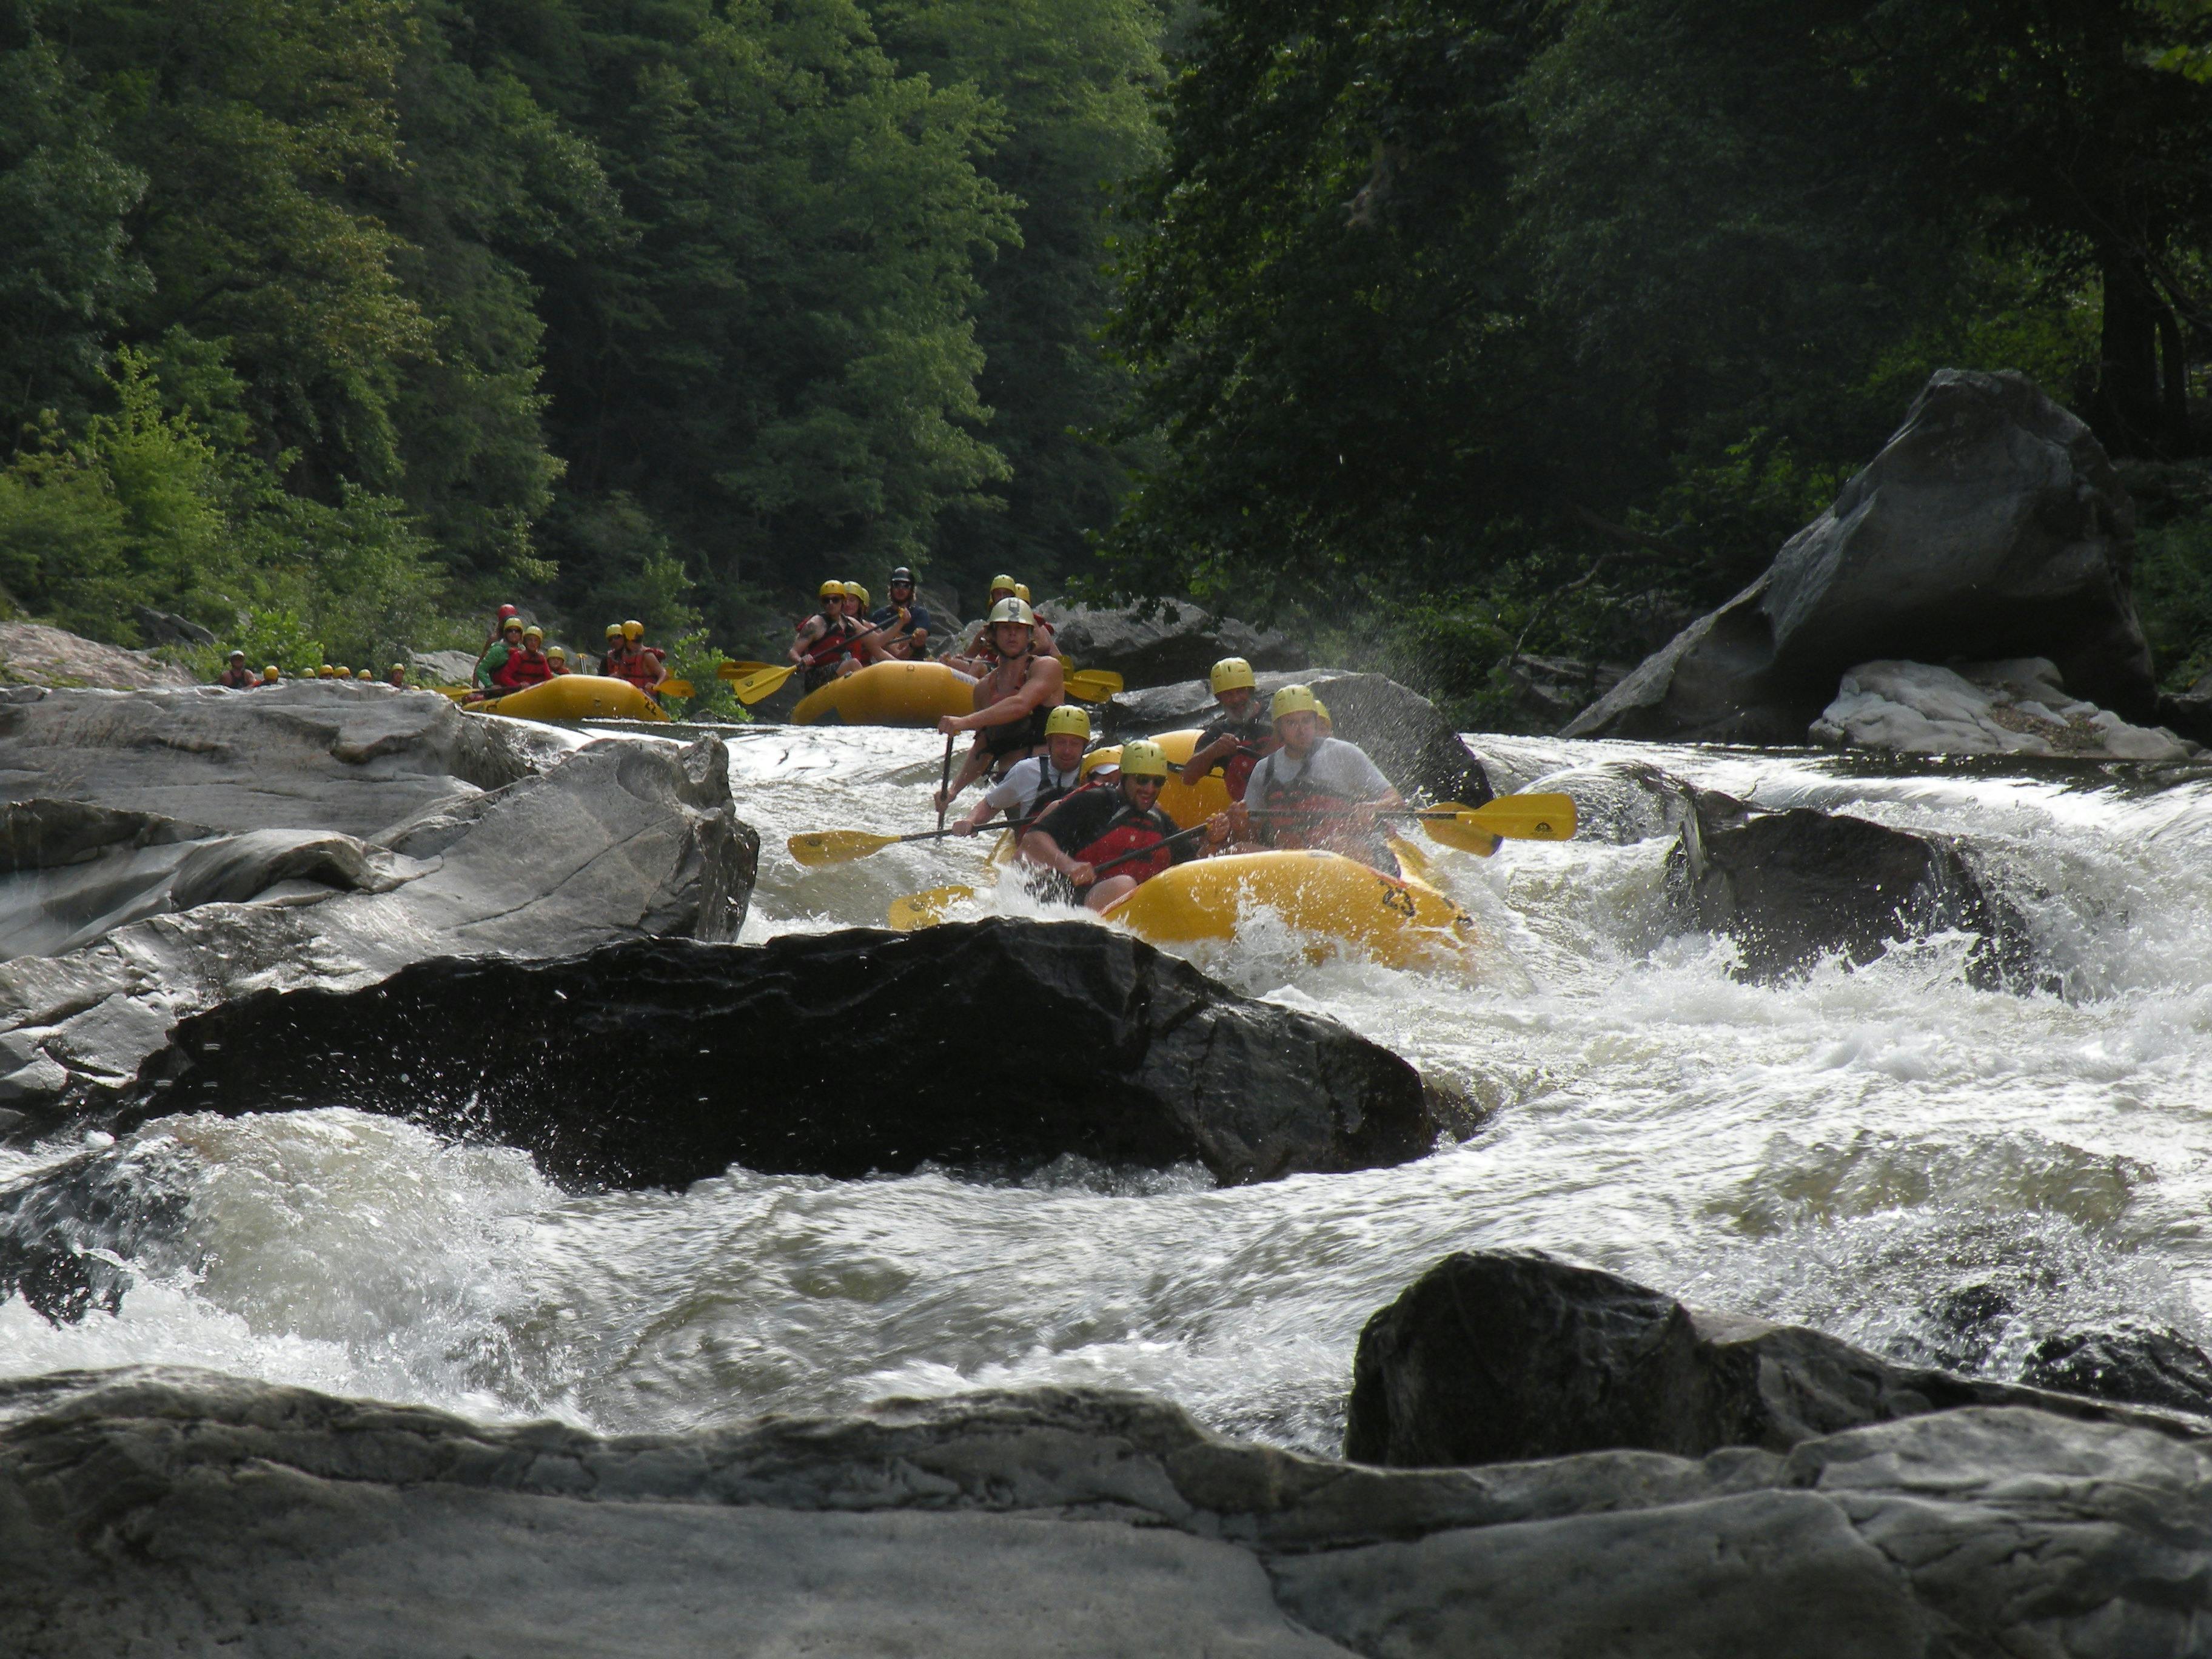 Multiple groups of whitewater rafters make their way down the Nolichucky River